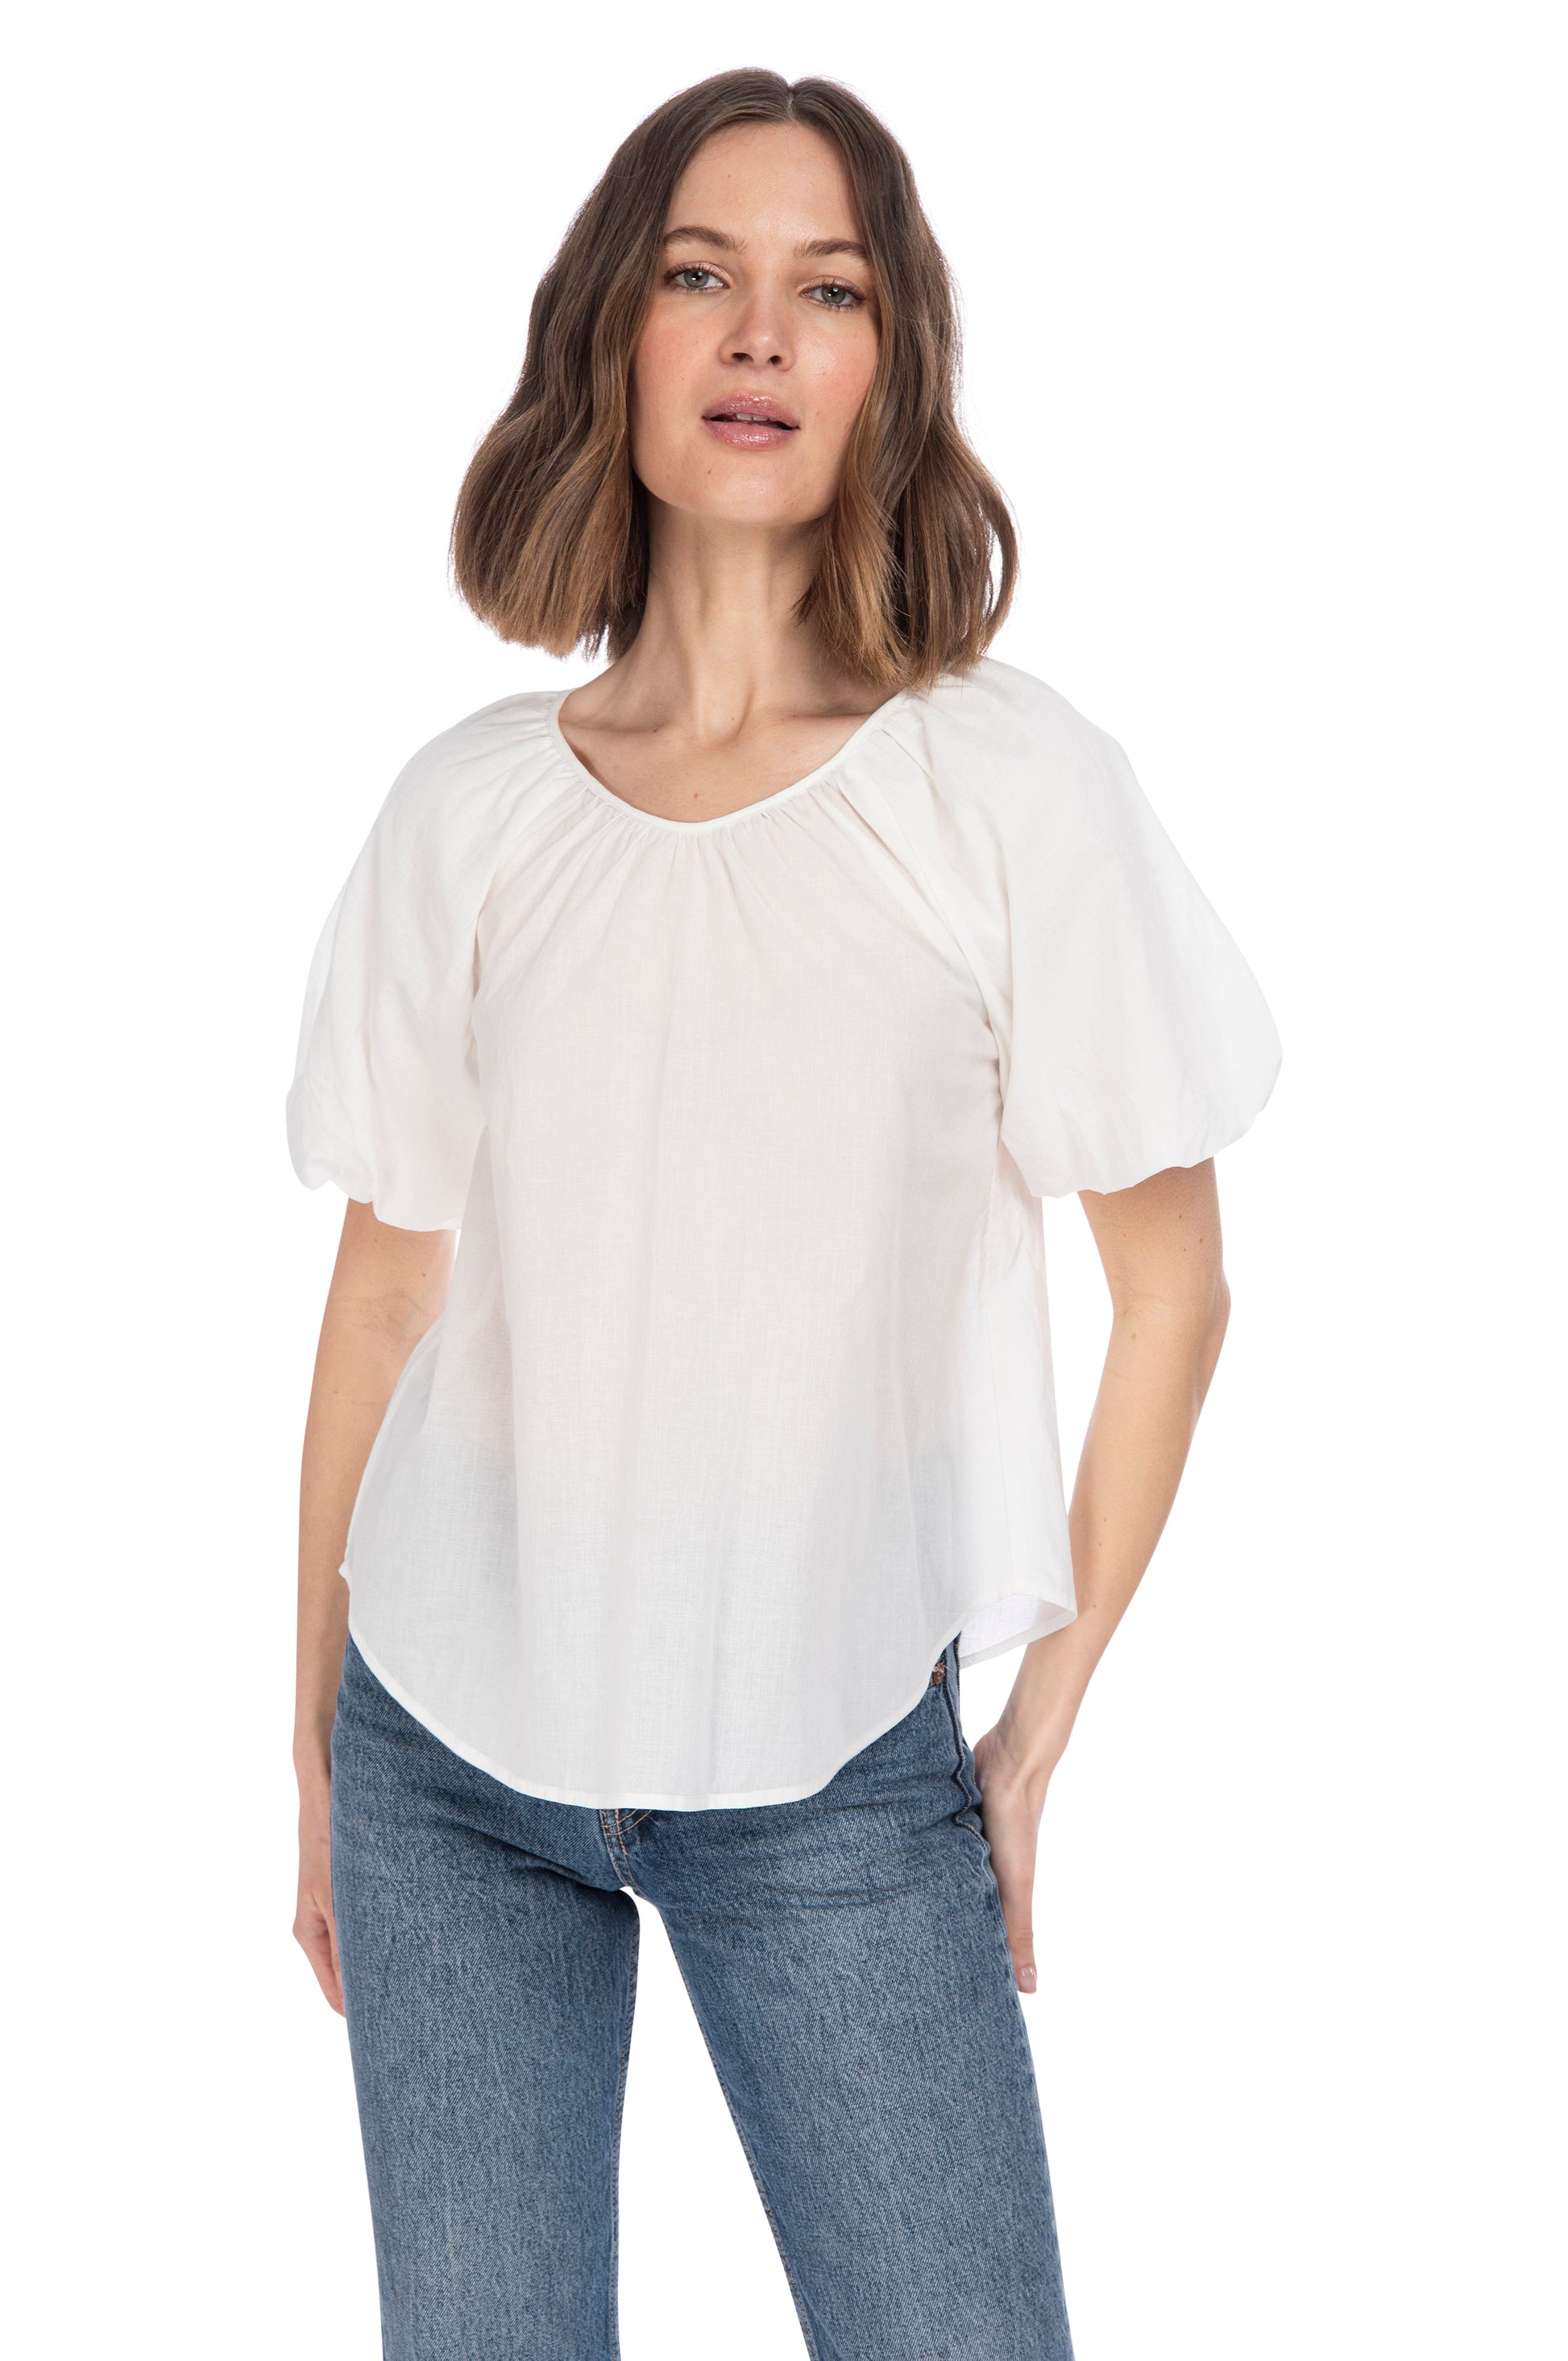 A woman wearing a B Collection by Bobeau Bubble Sleeve Cotton Top and blue jeans standing against a white background.